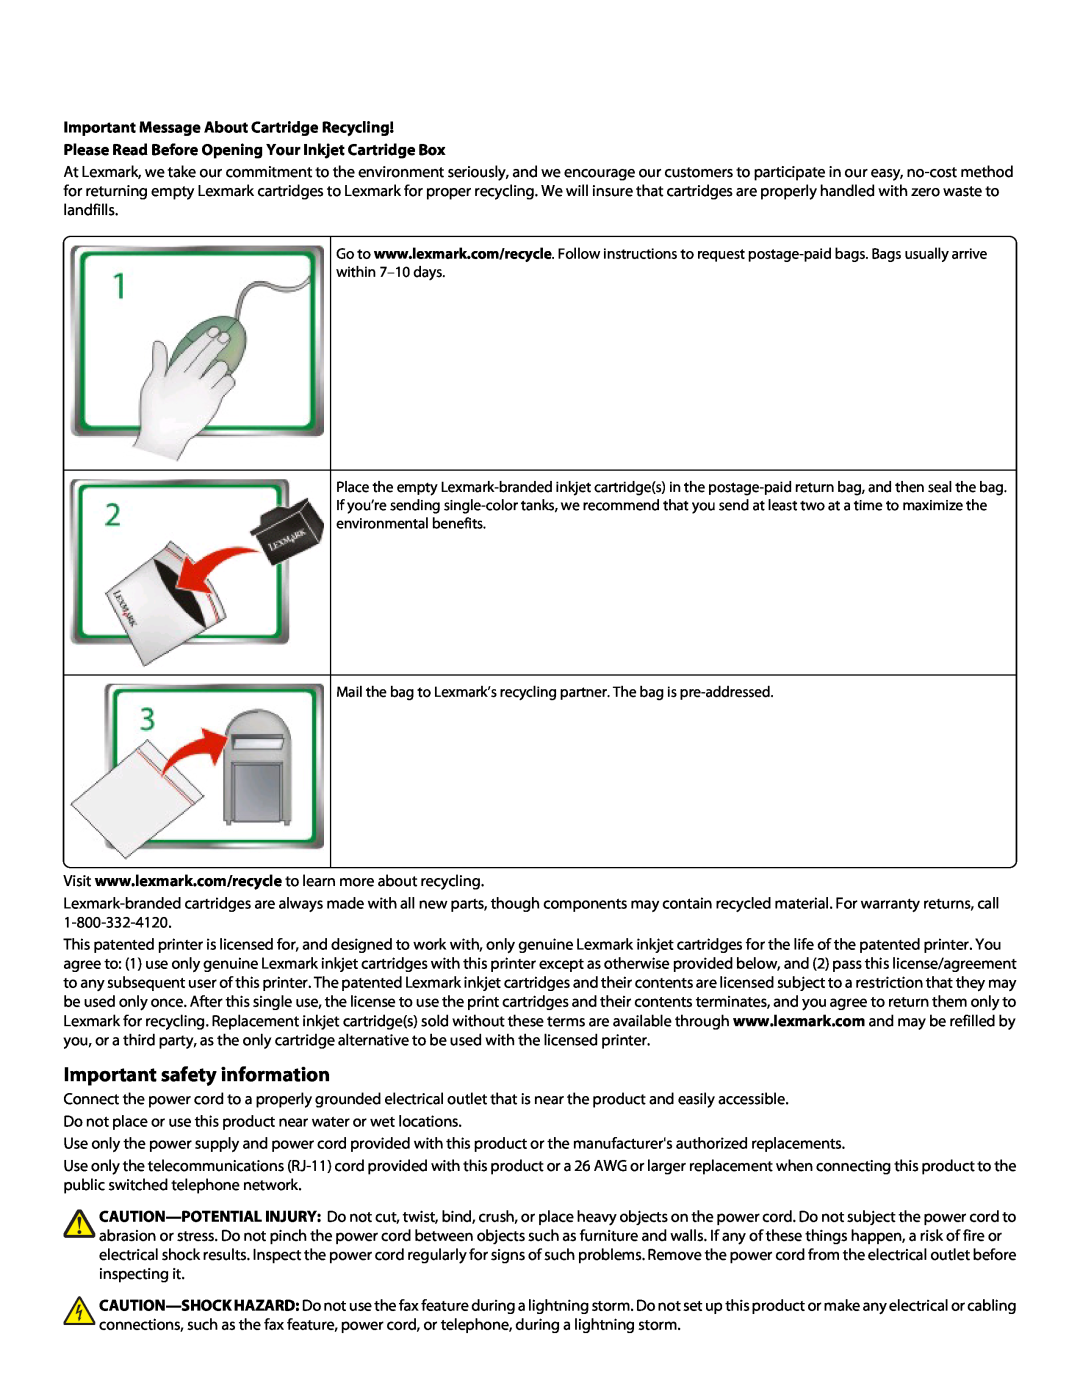 Lexmark S400 manual Important safety information, Important Message About Cartridge Recycling 